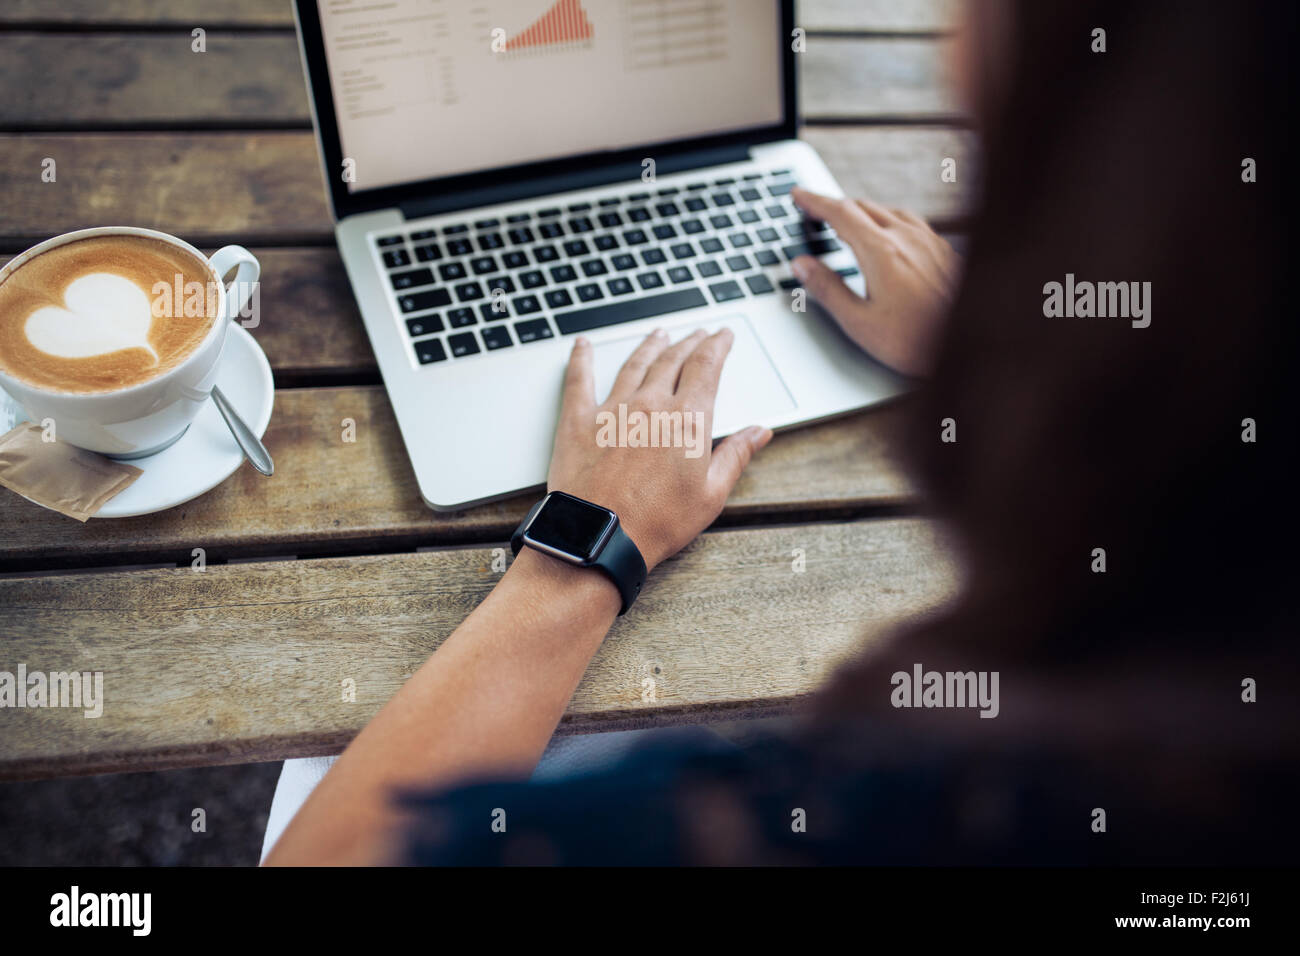 Woman typing on keyboard of a laptop with a coffee cup on wooden table. Female wearing a smartwatch at cafe. Stock Photo